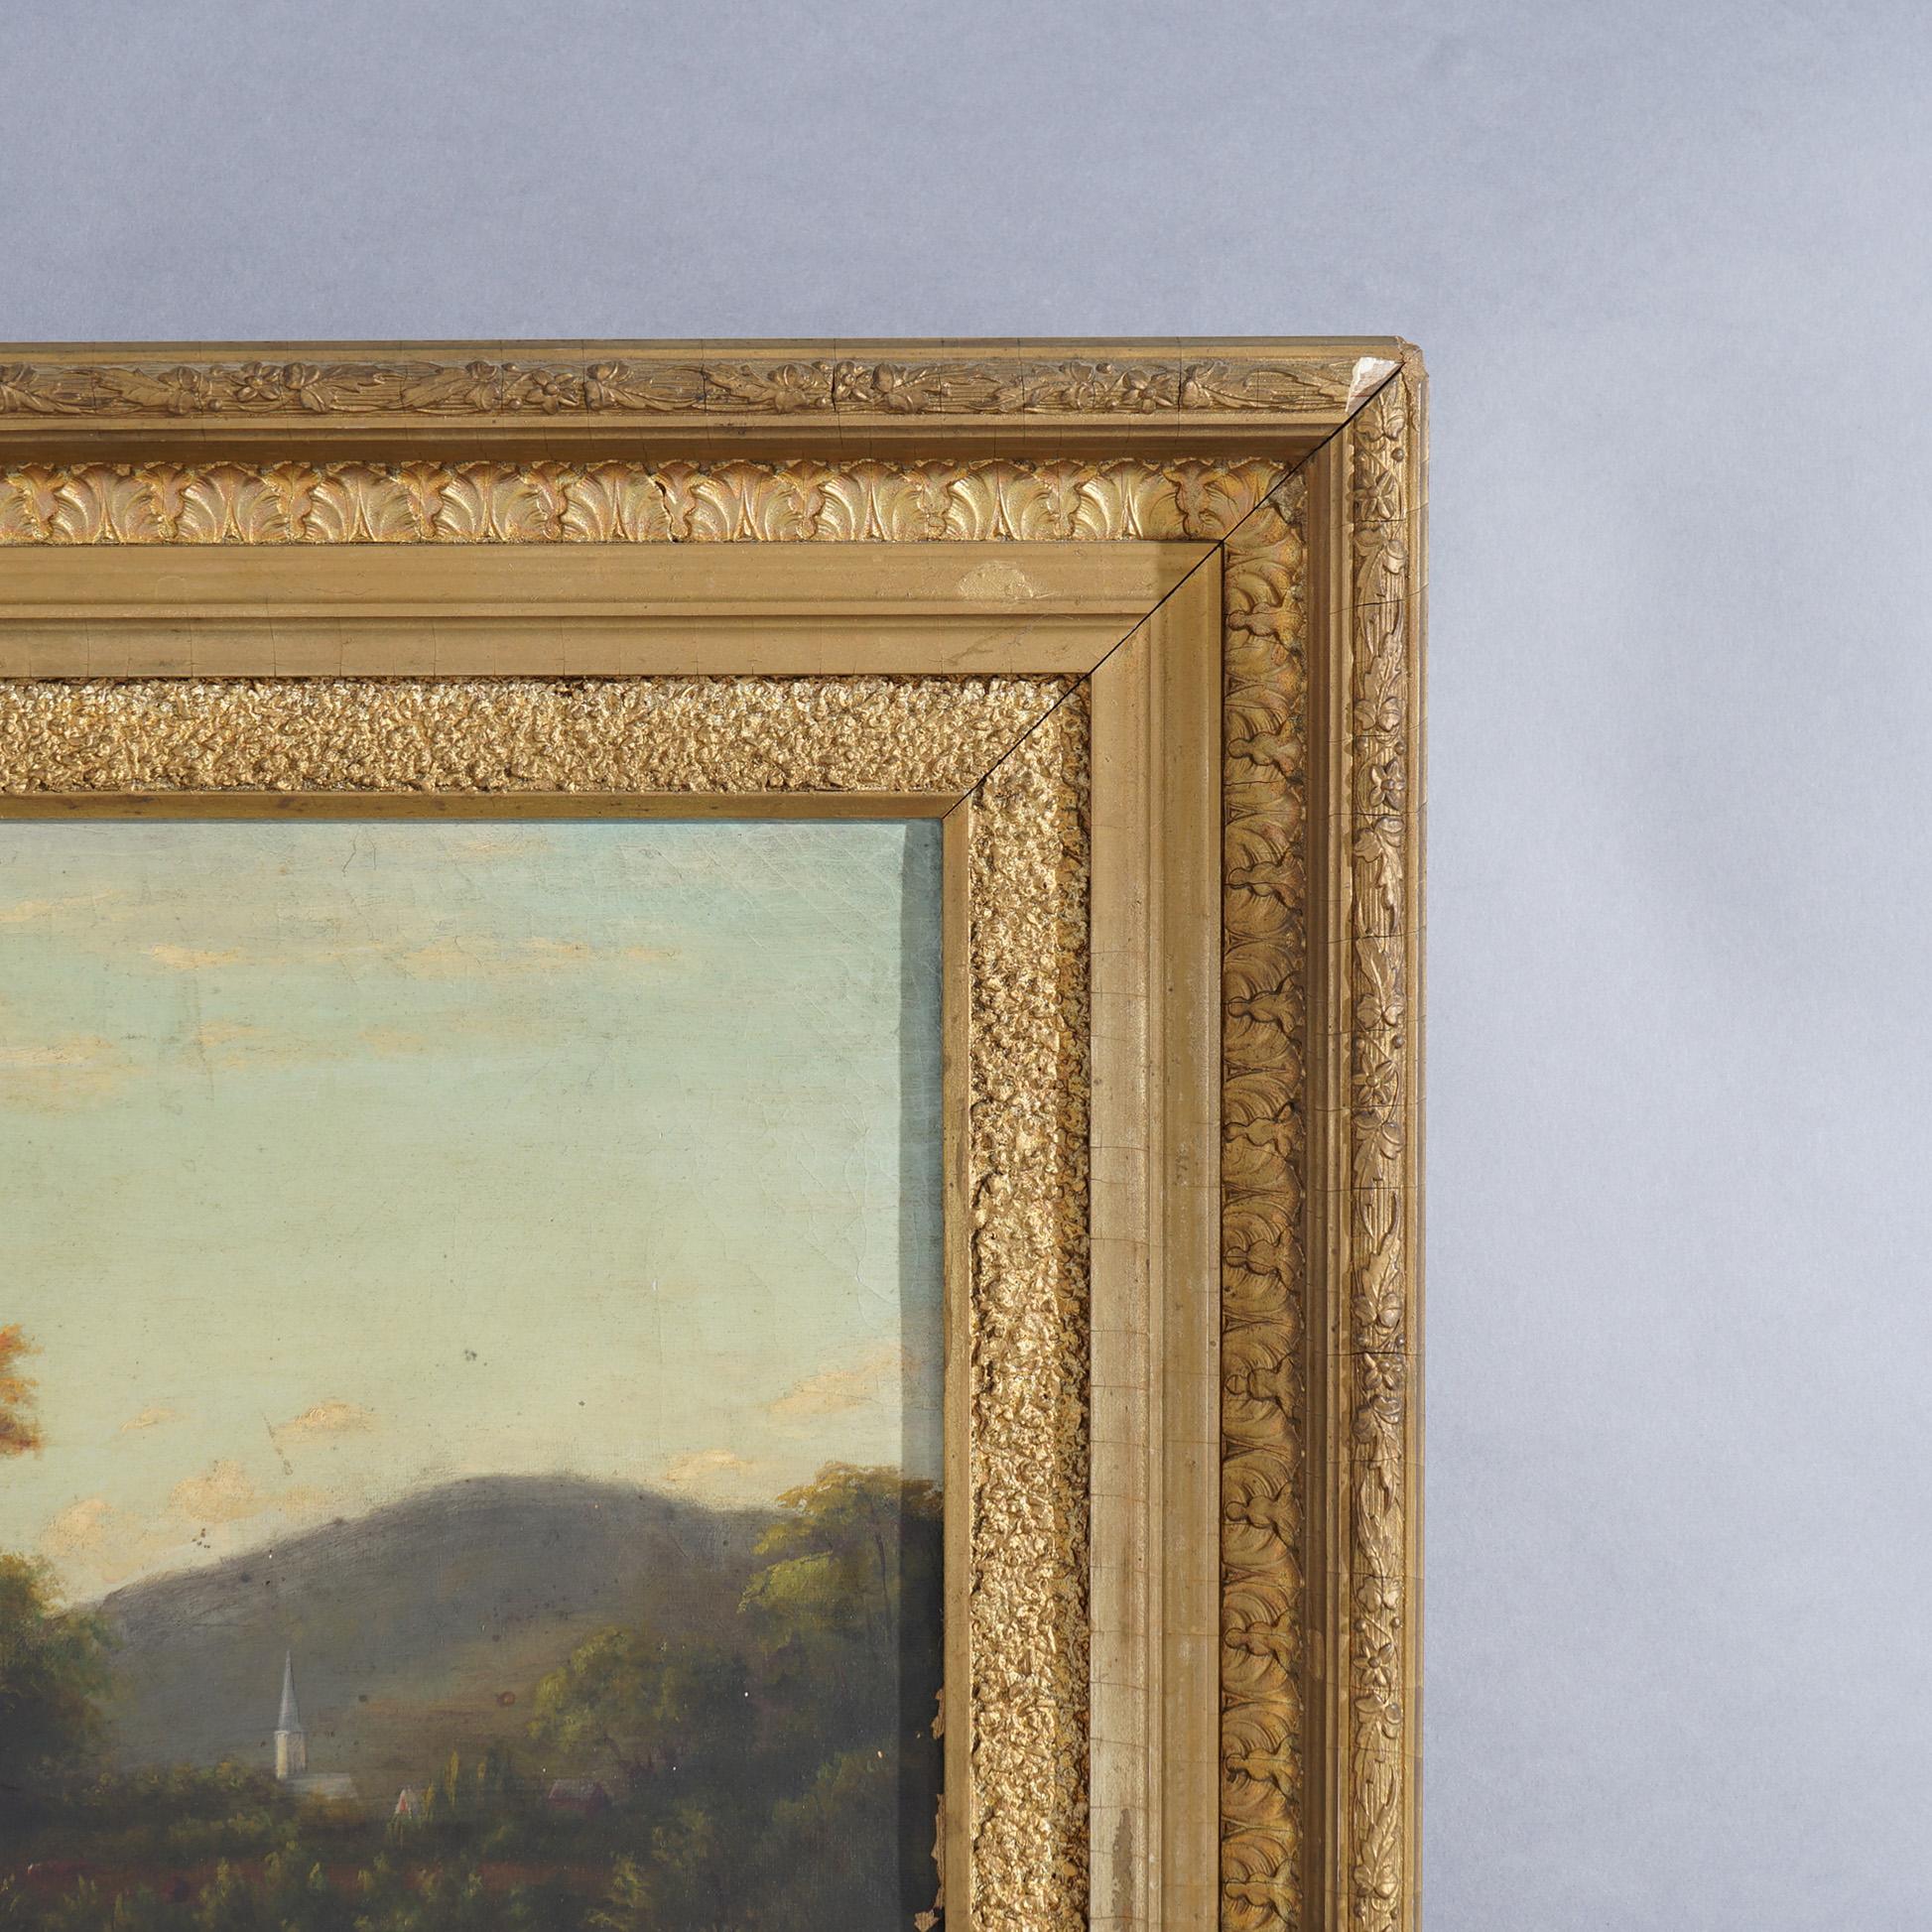 Hand-Painted Antique Hudson River School Landscape Painting with Cattle, Stream and Church For Sale